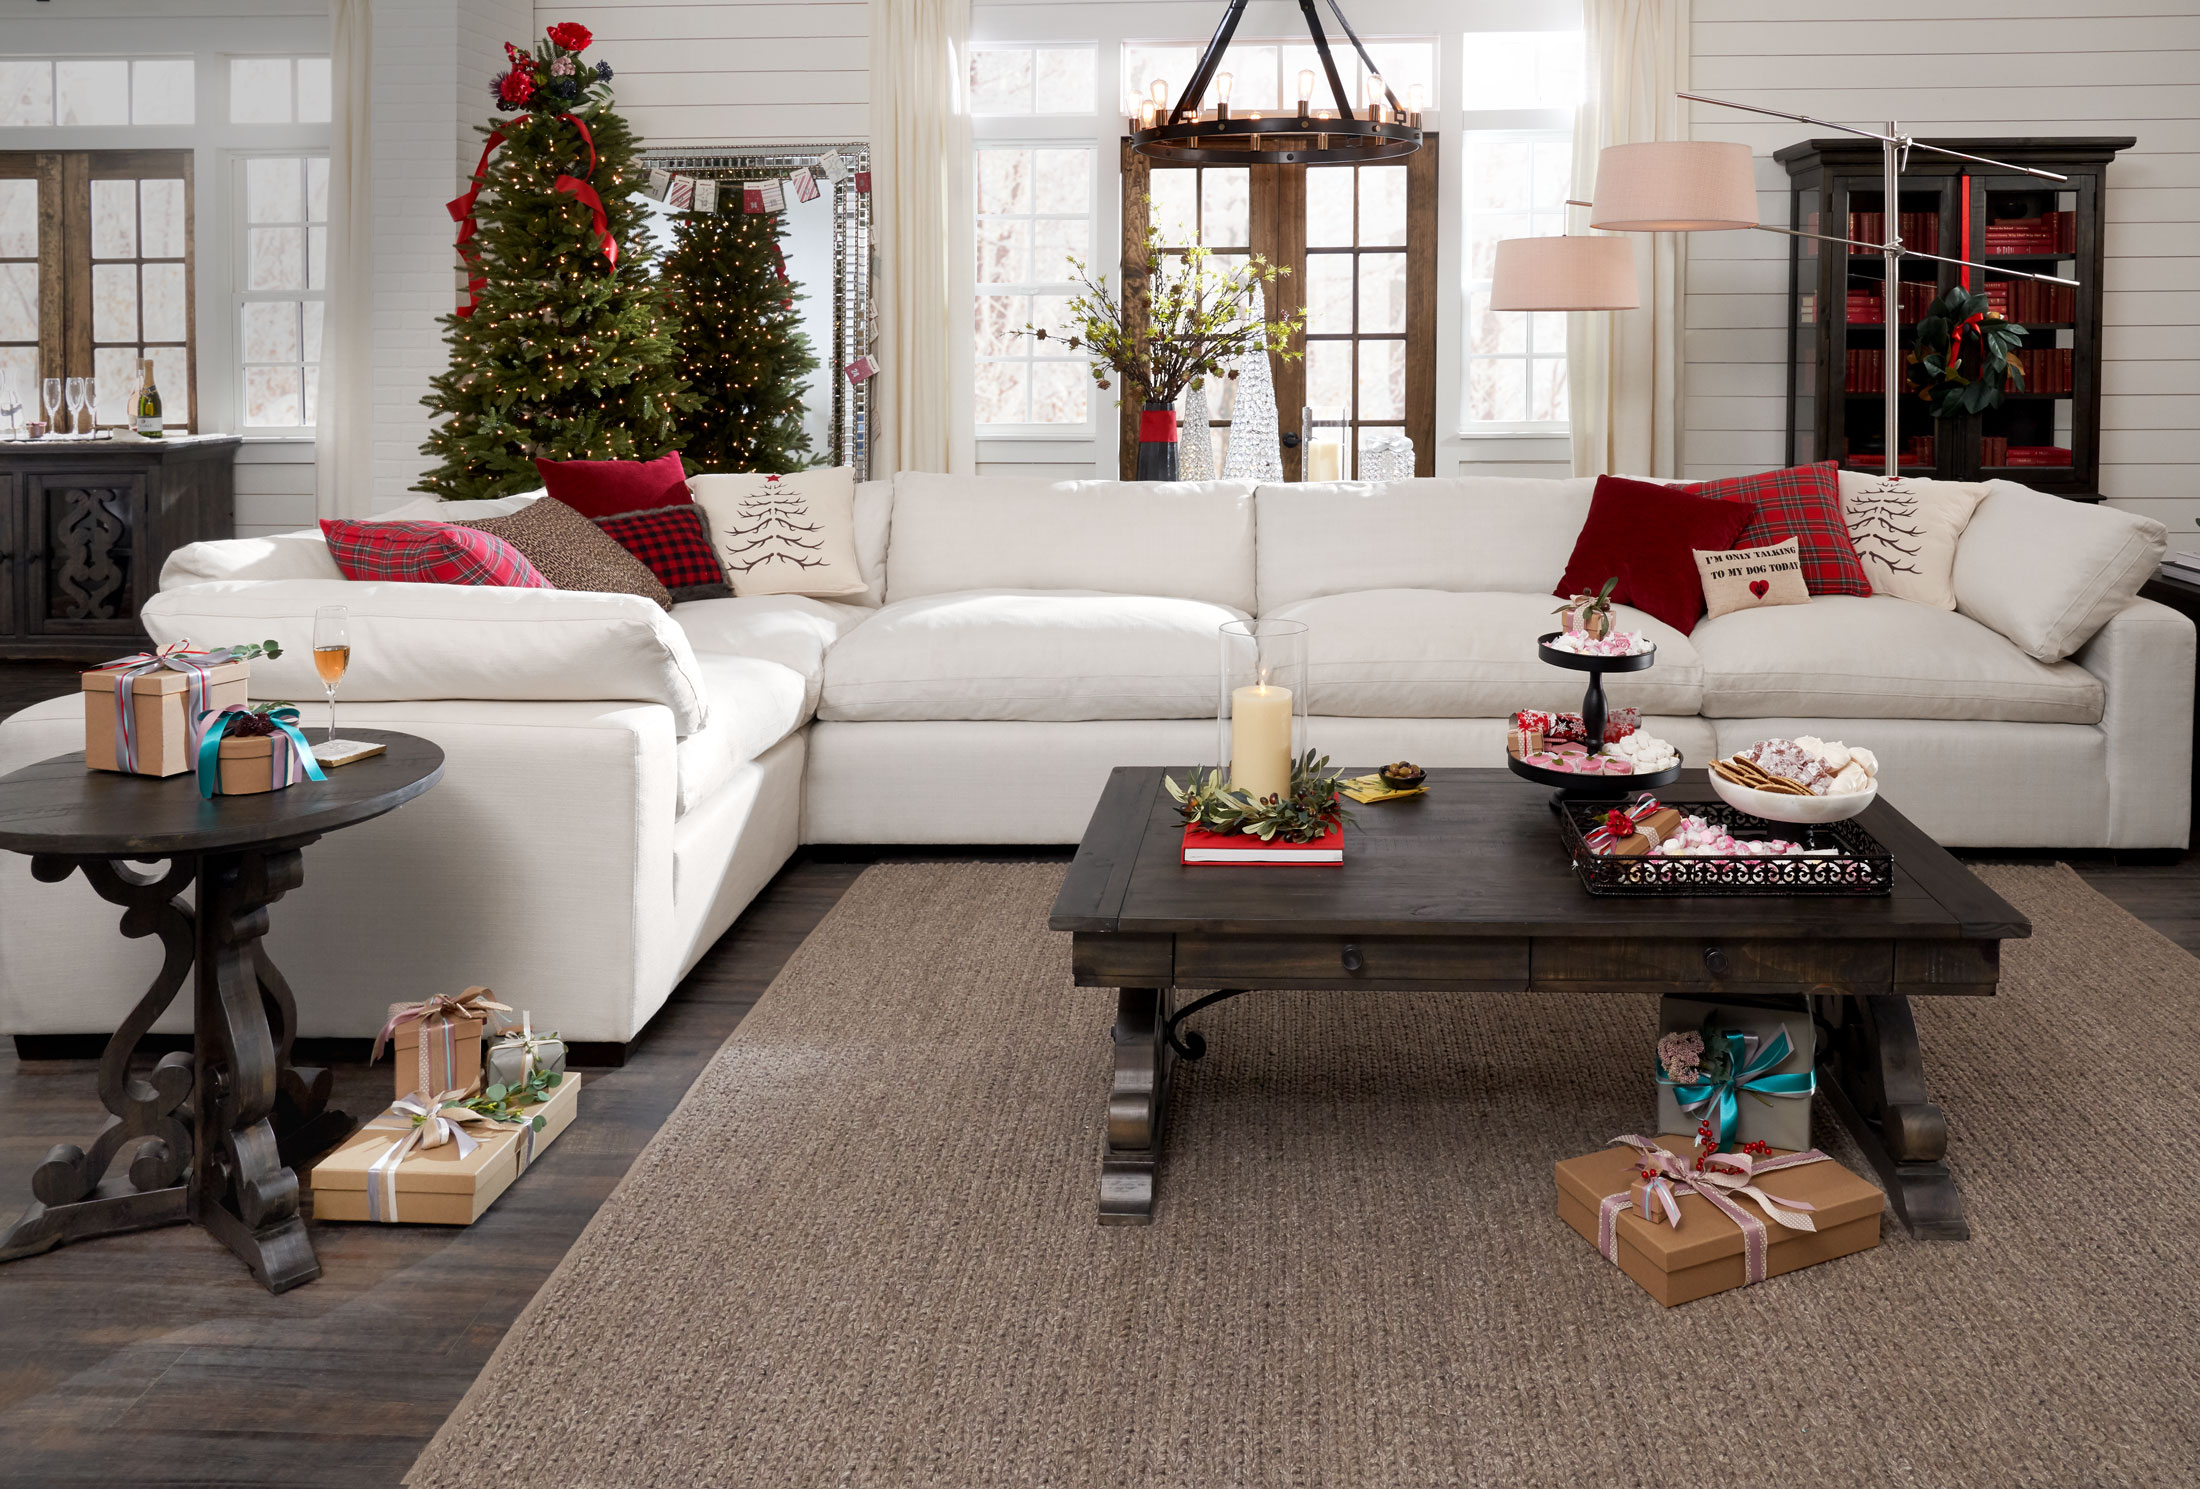 The Plush Collection, Plush Living Room Furniture Sets